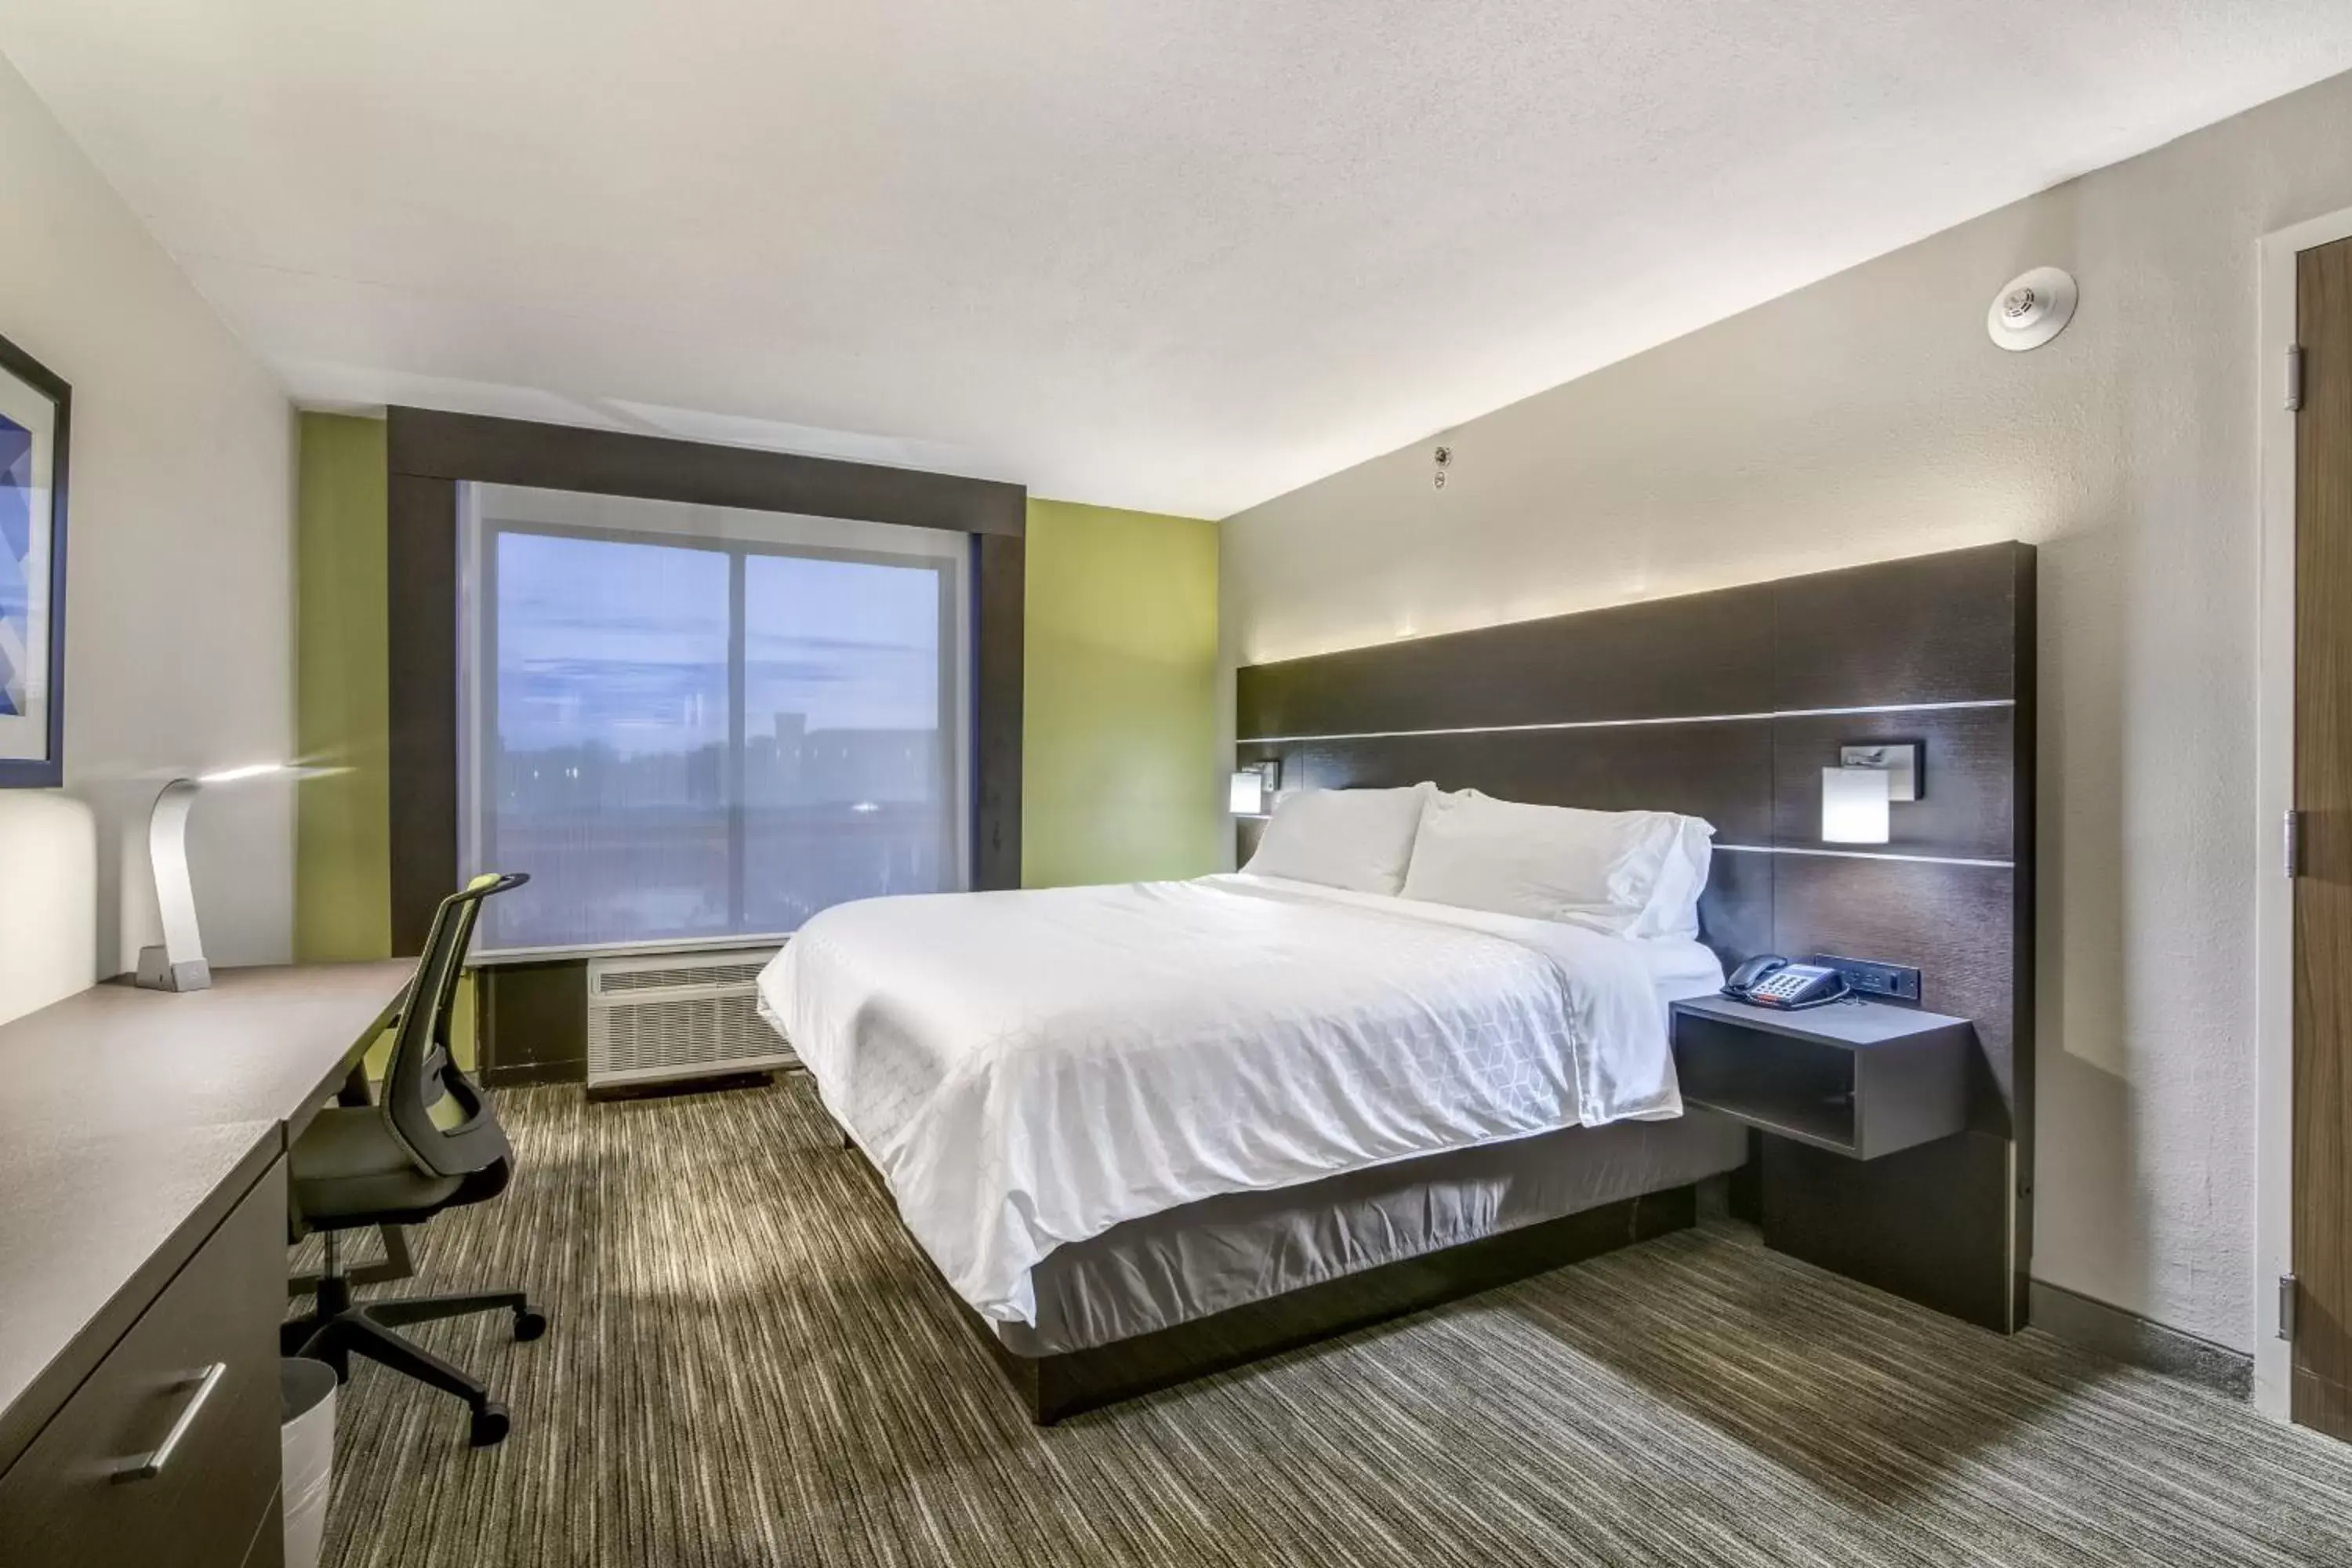 Holiday Inn Express & Suites Longview North, an IHG Hotel